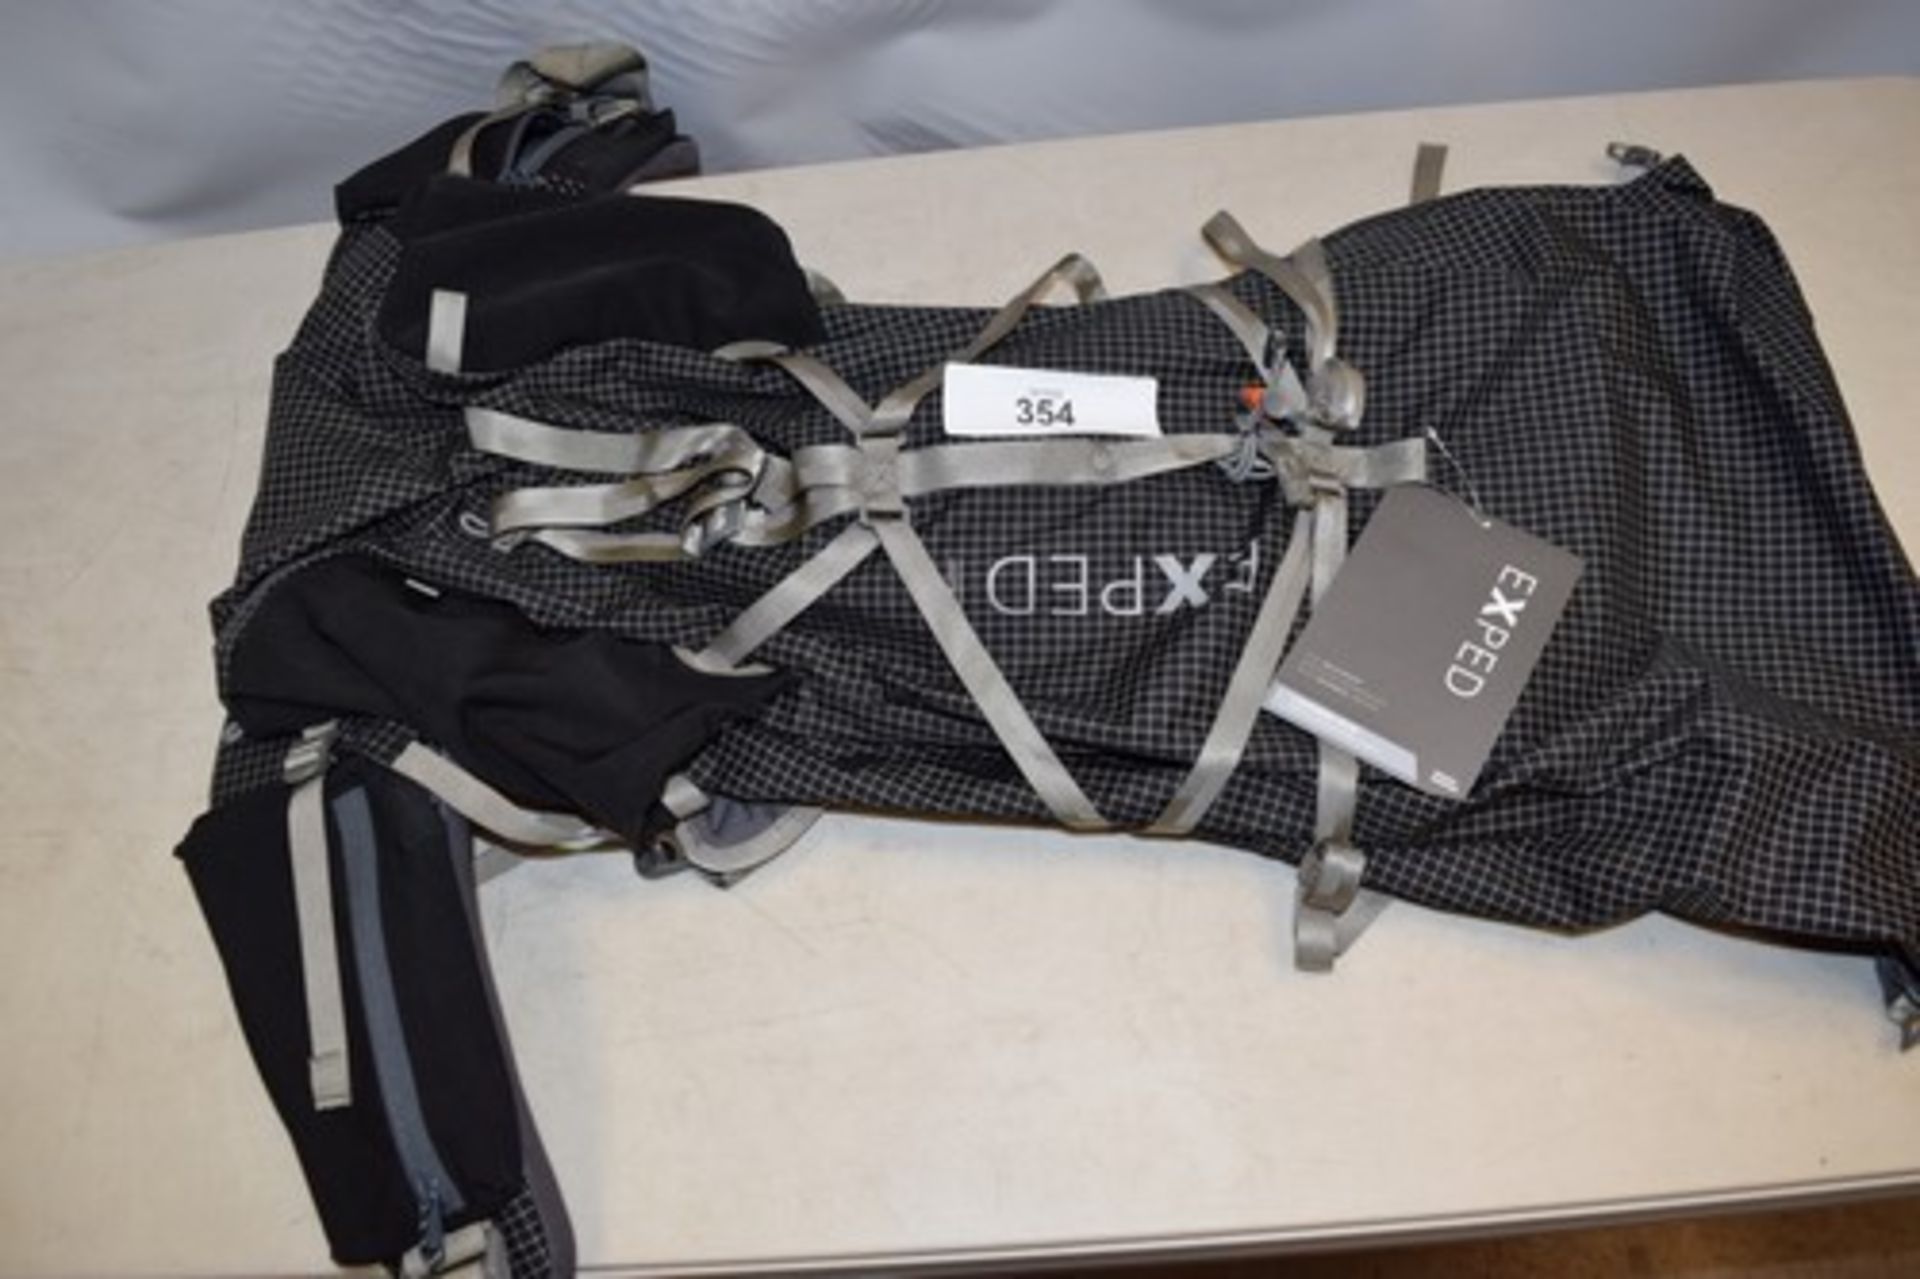 1 x Exped Lightening 45 BLK backpack - New with tags (ES16)